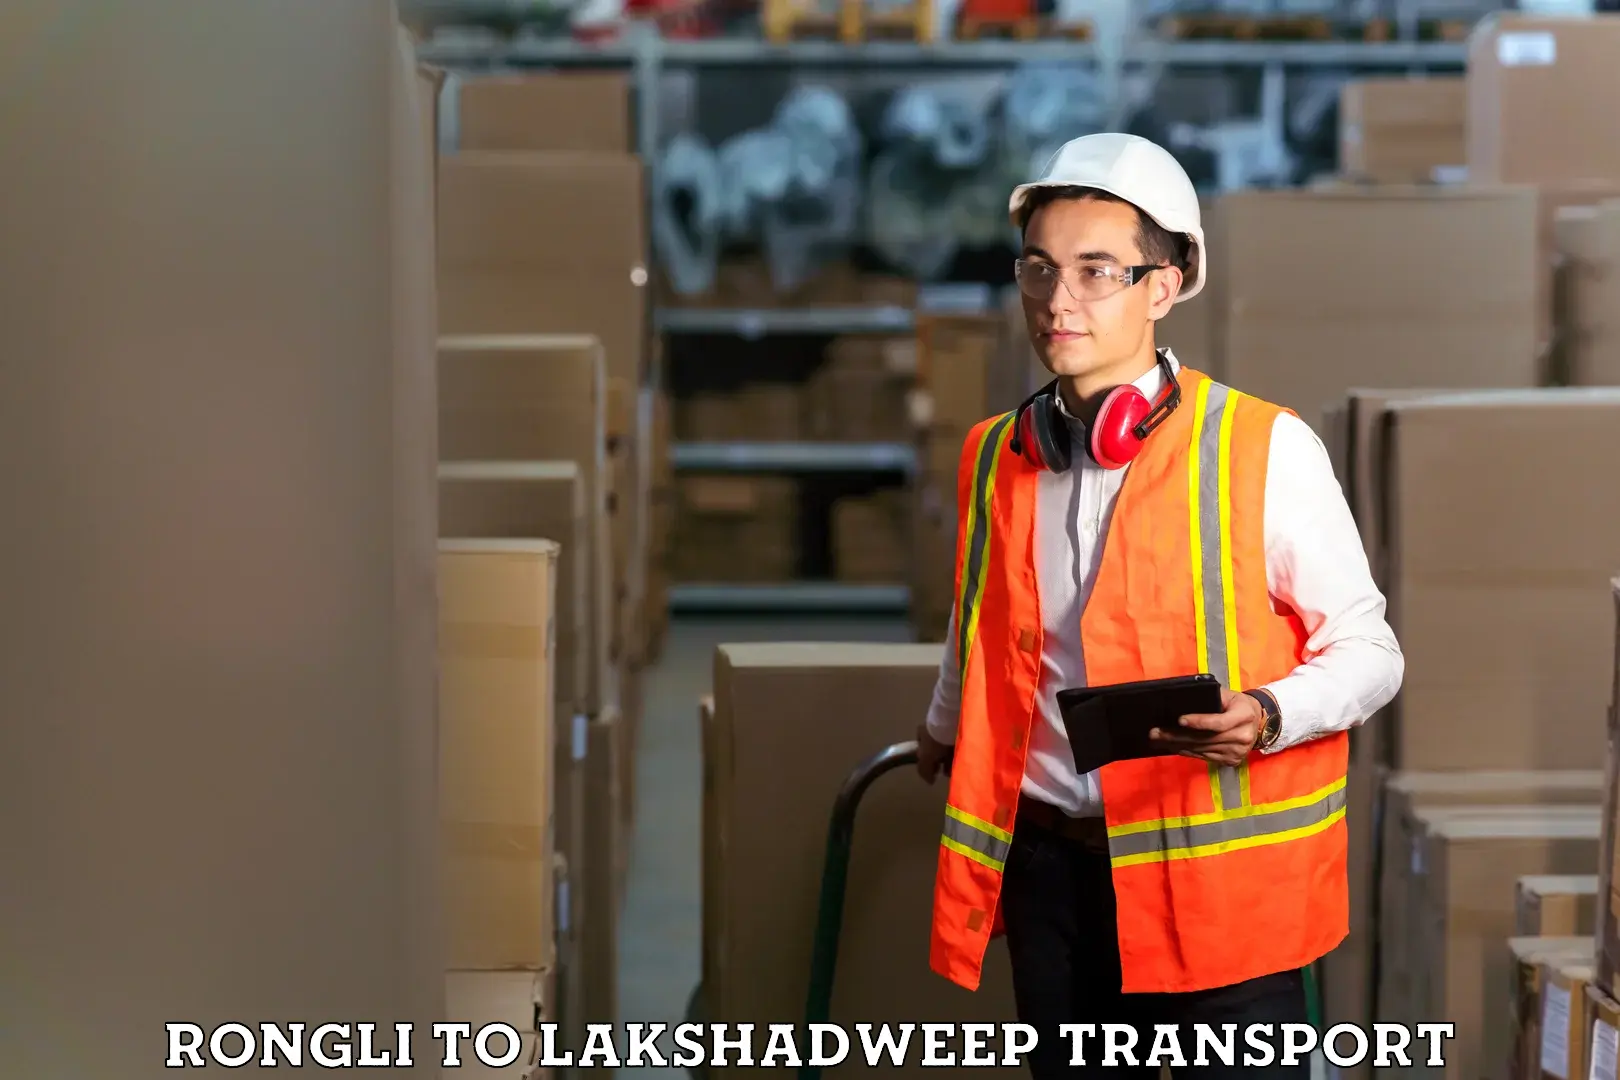 Truck transport companies in India Rongli to Lakshadweep